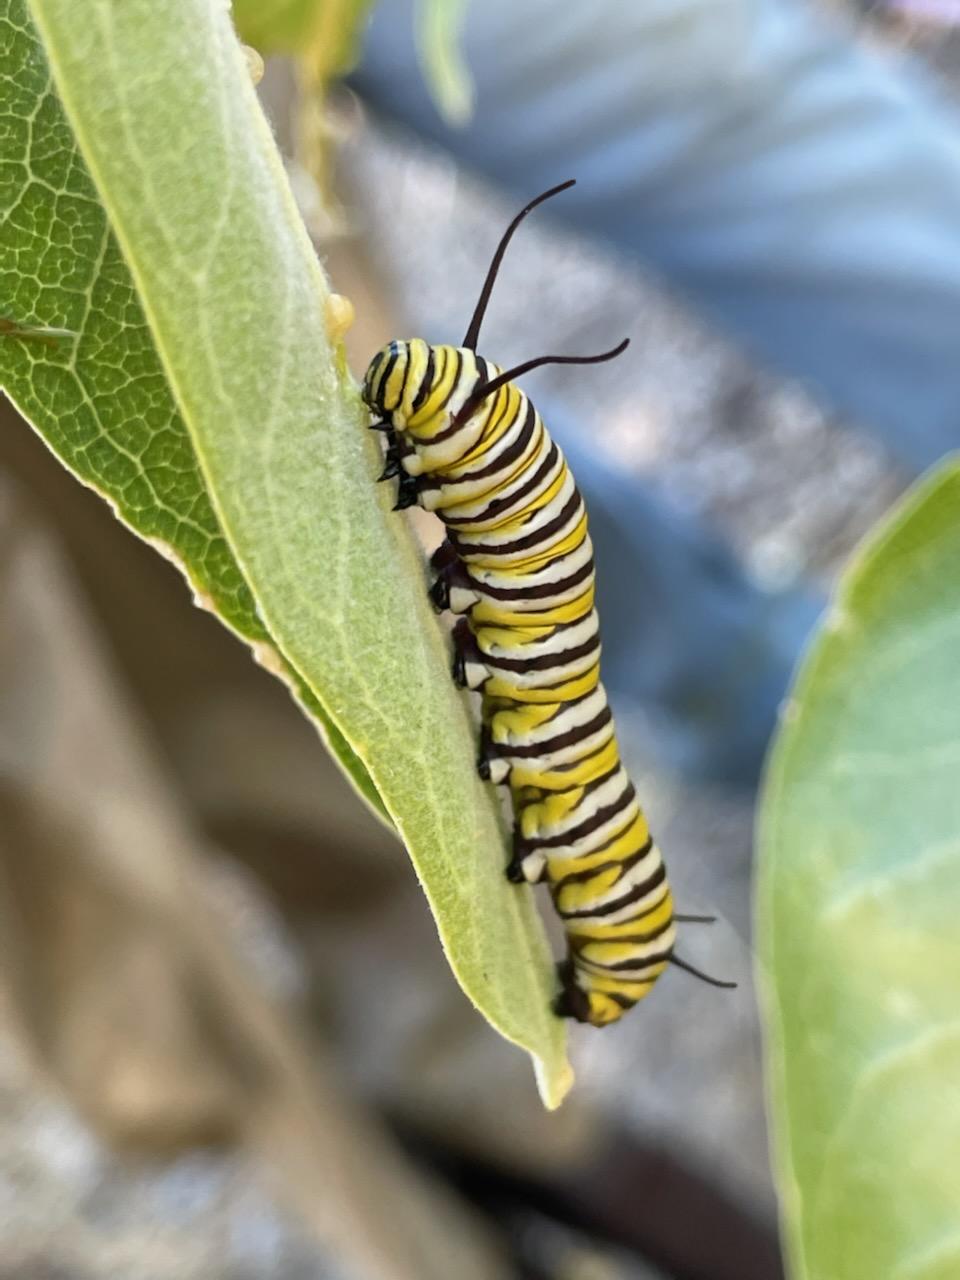 a chubby yellow, white, and black striped caterpillar with long black antennae sits on a green milkweed leaf